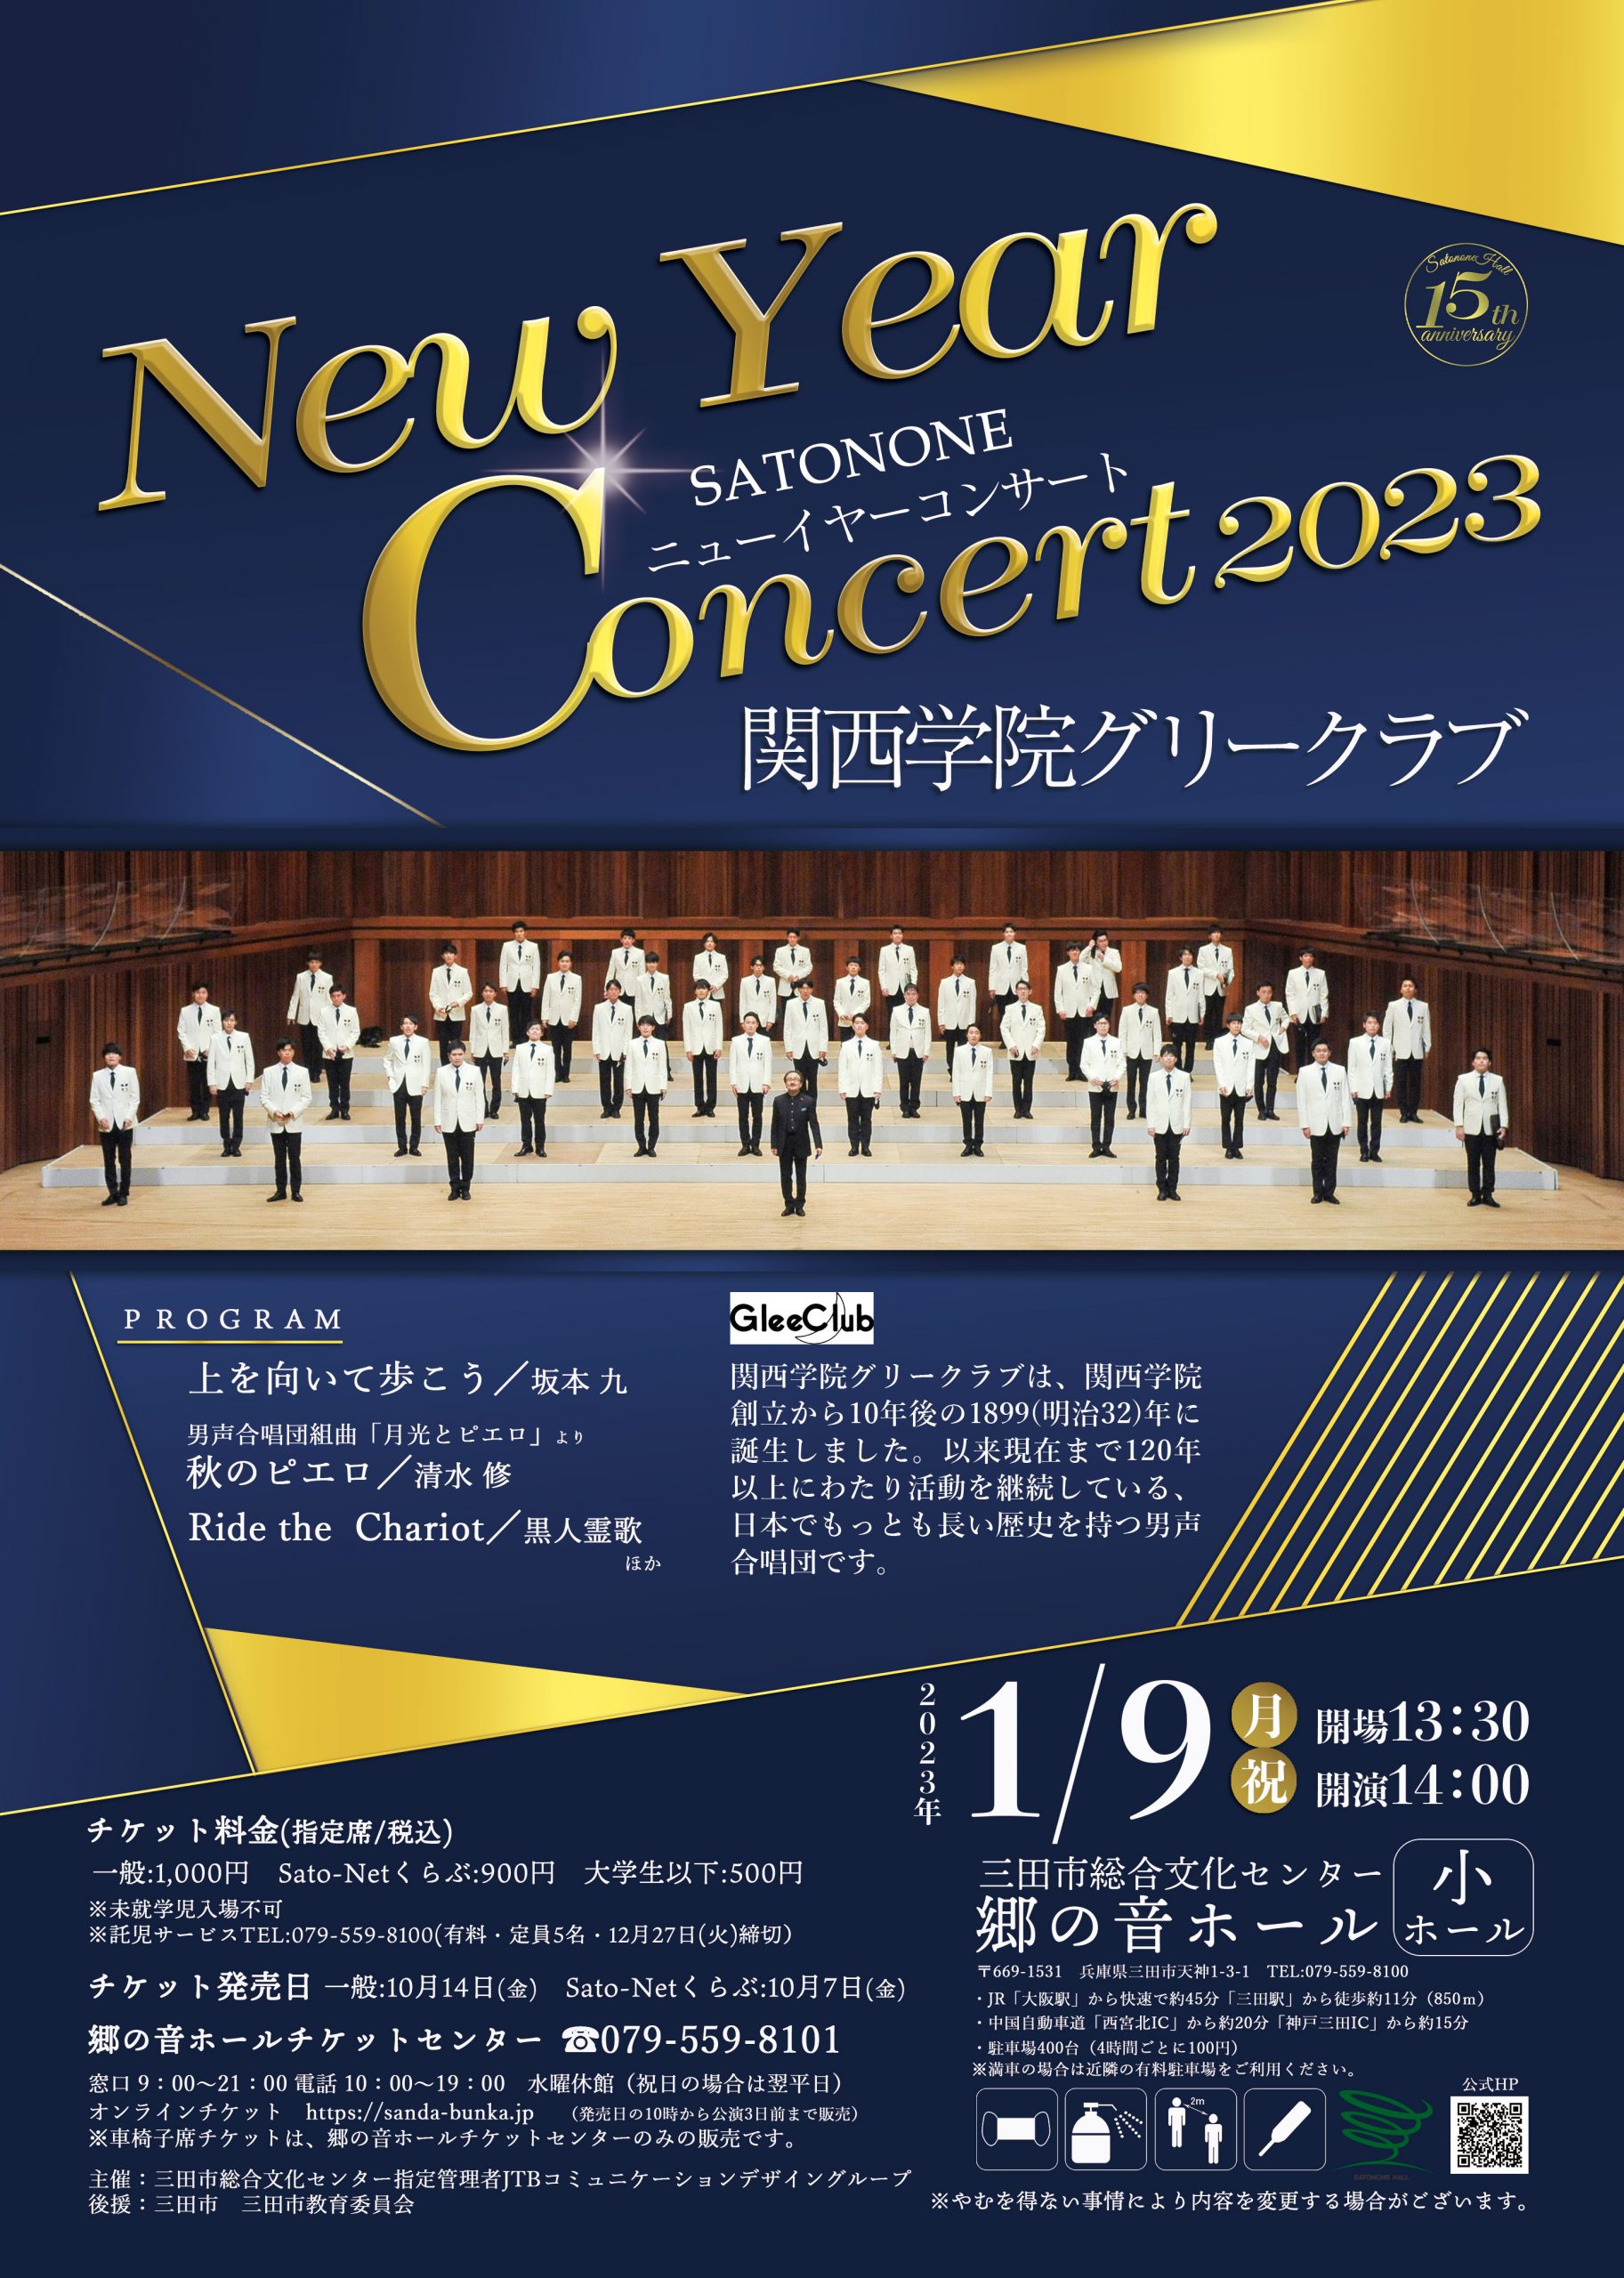 New Year Concert 2023